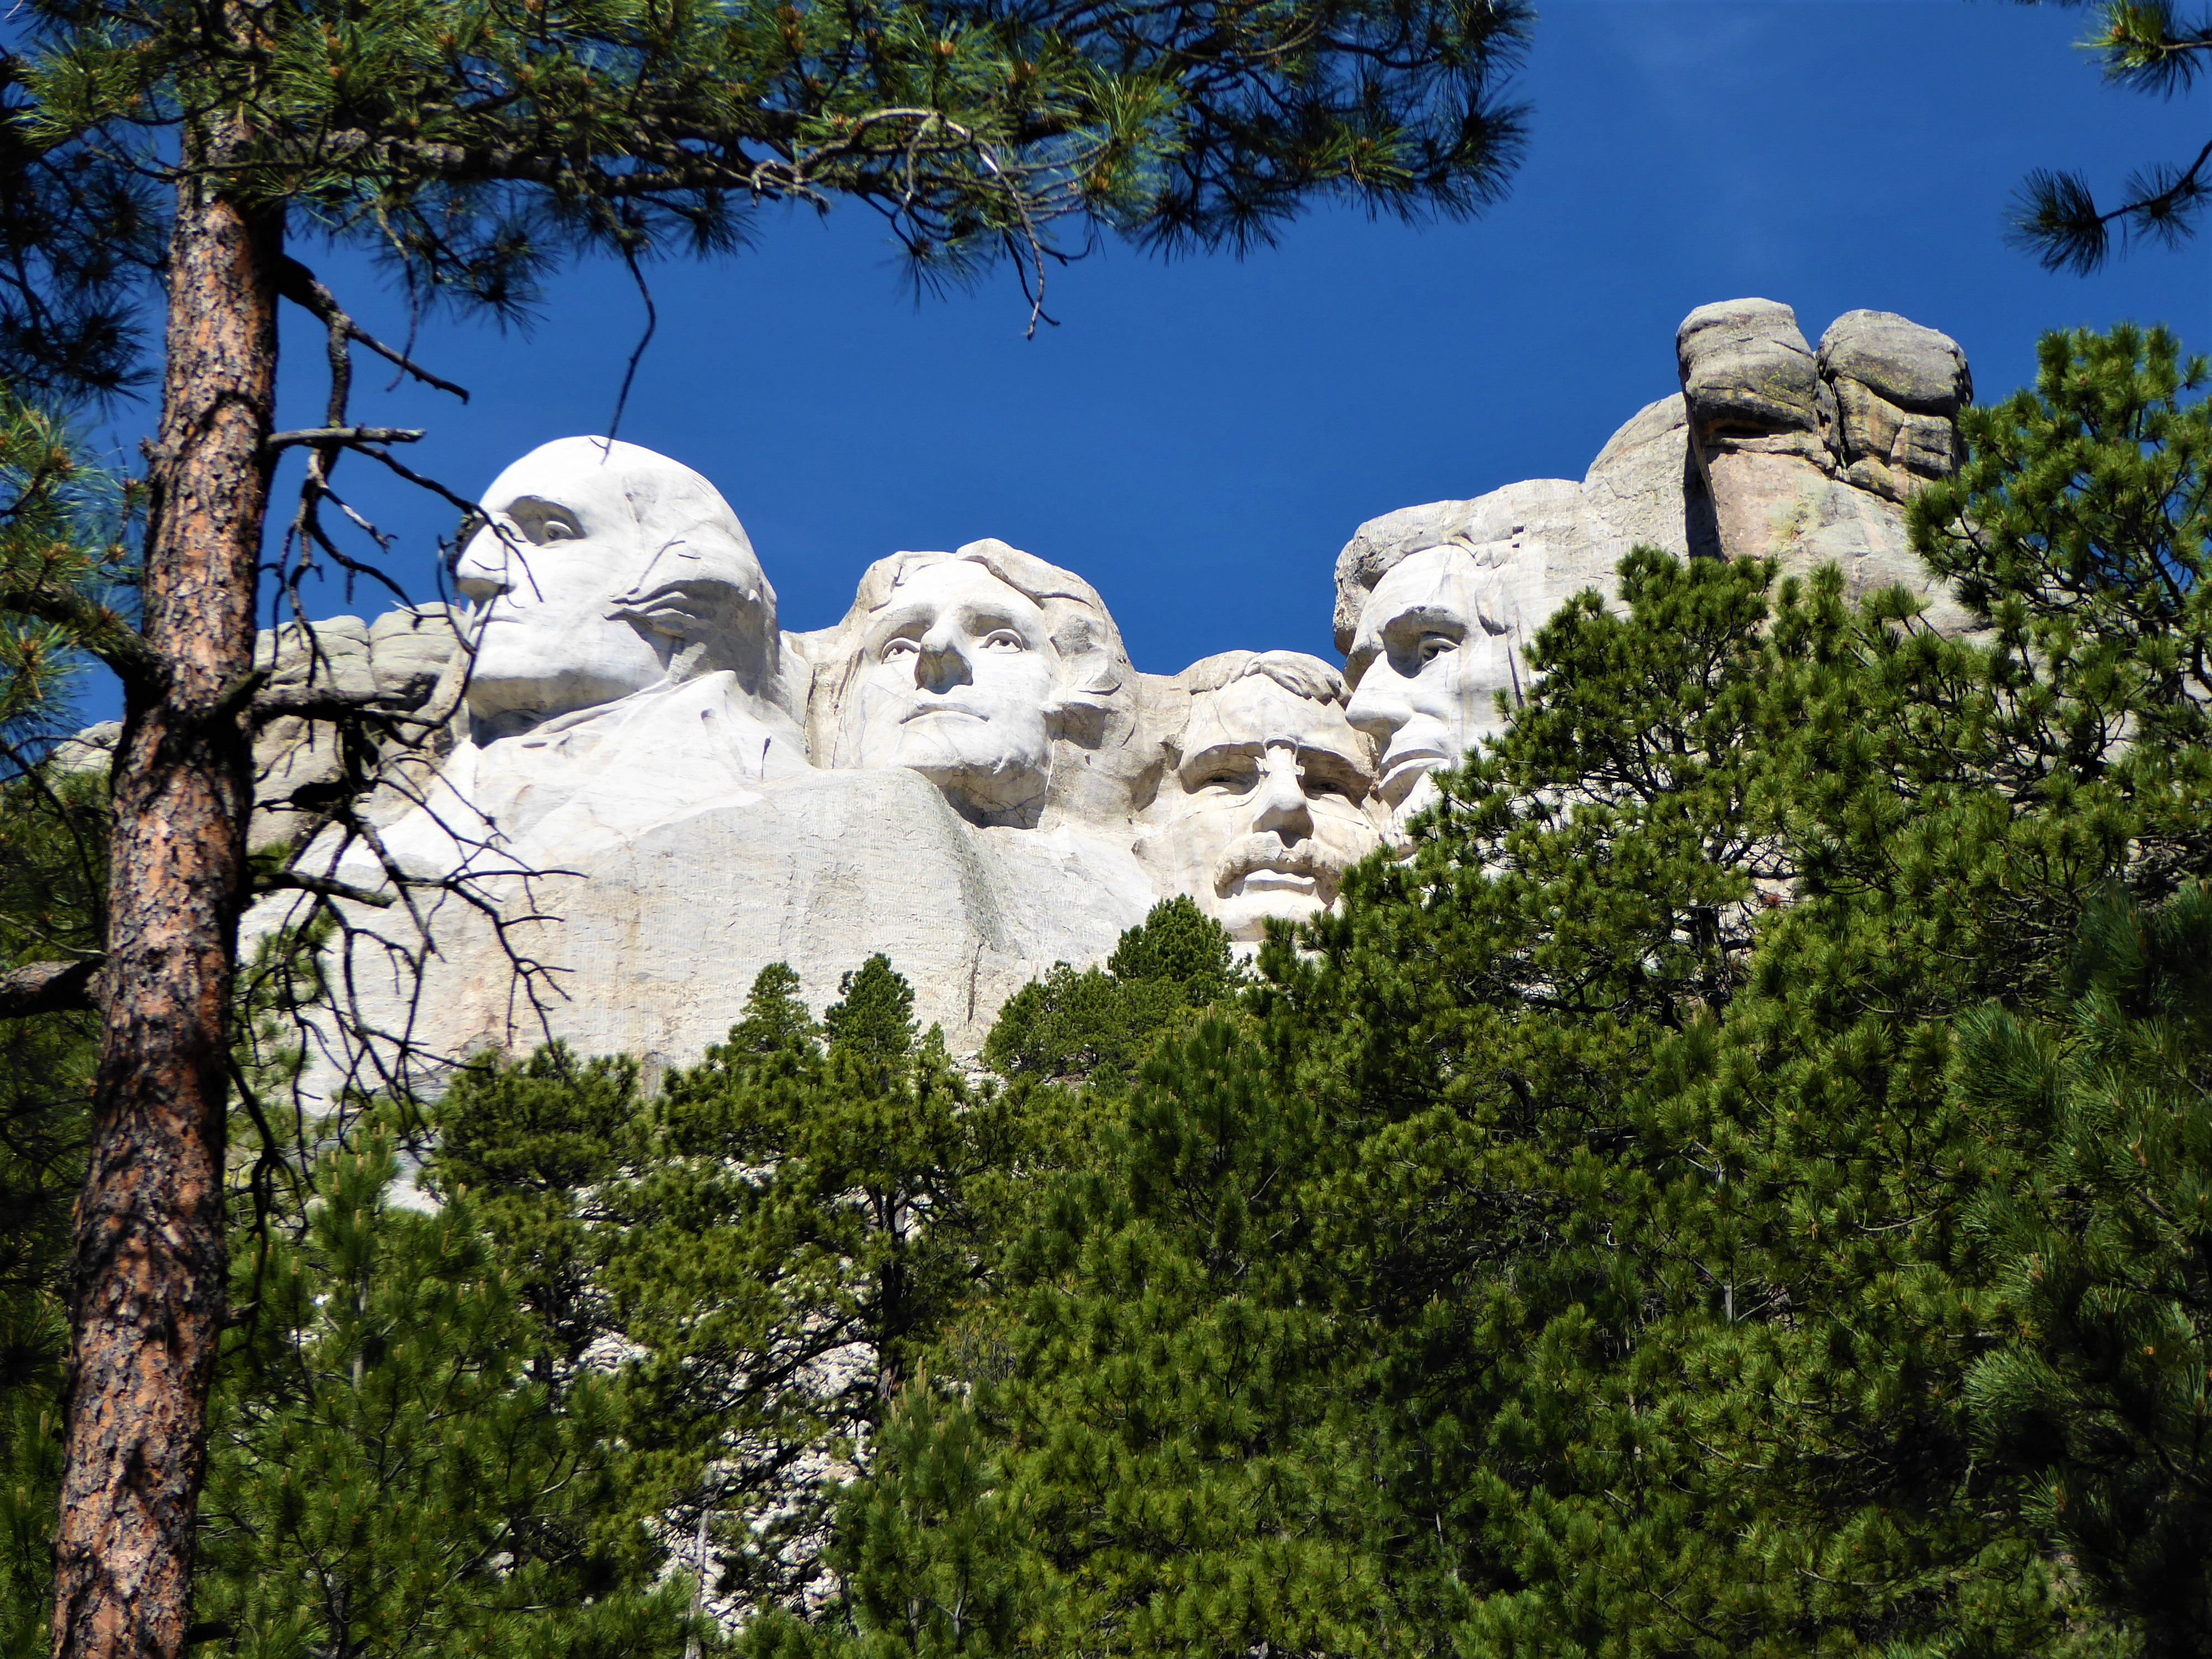 What to See and Do at Mount Rushmore